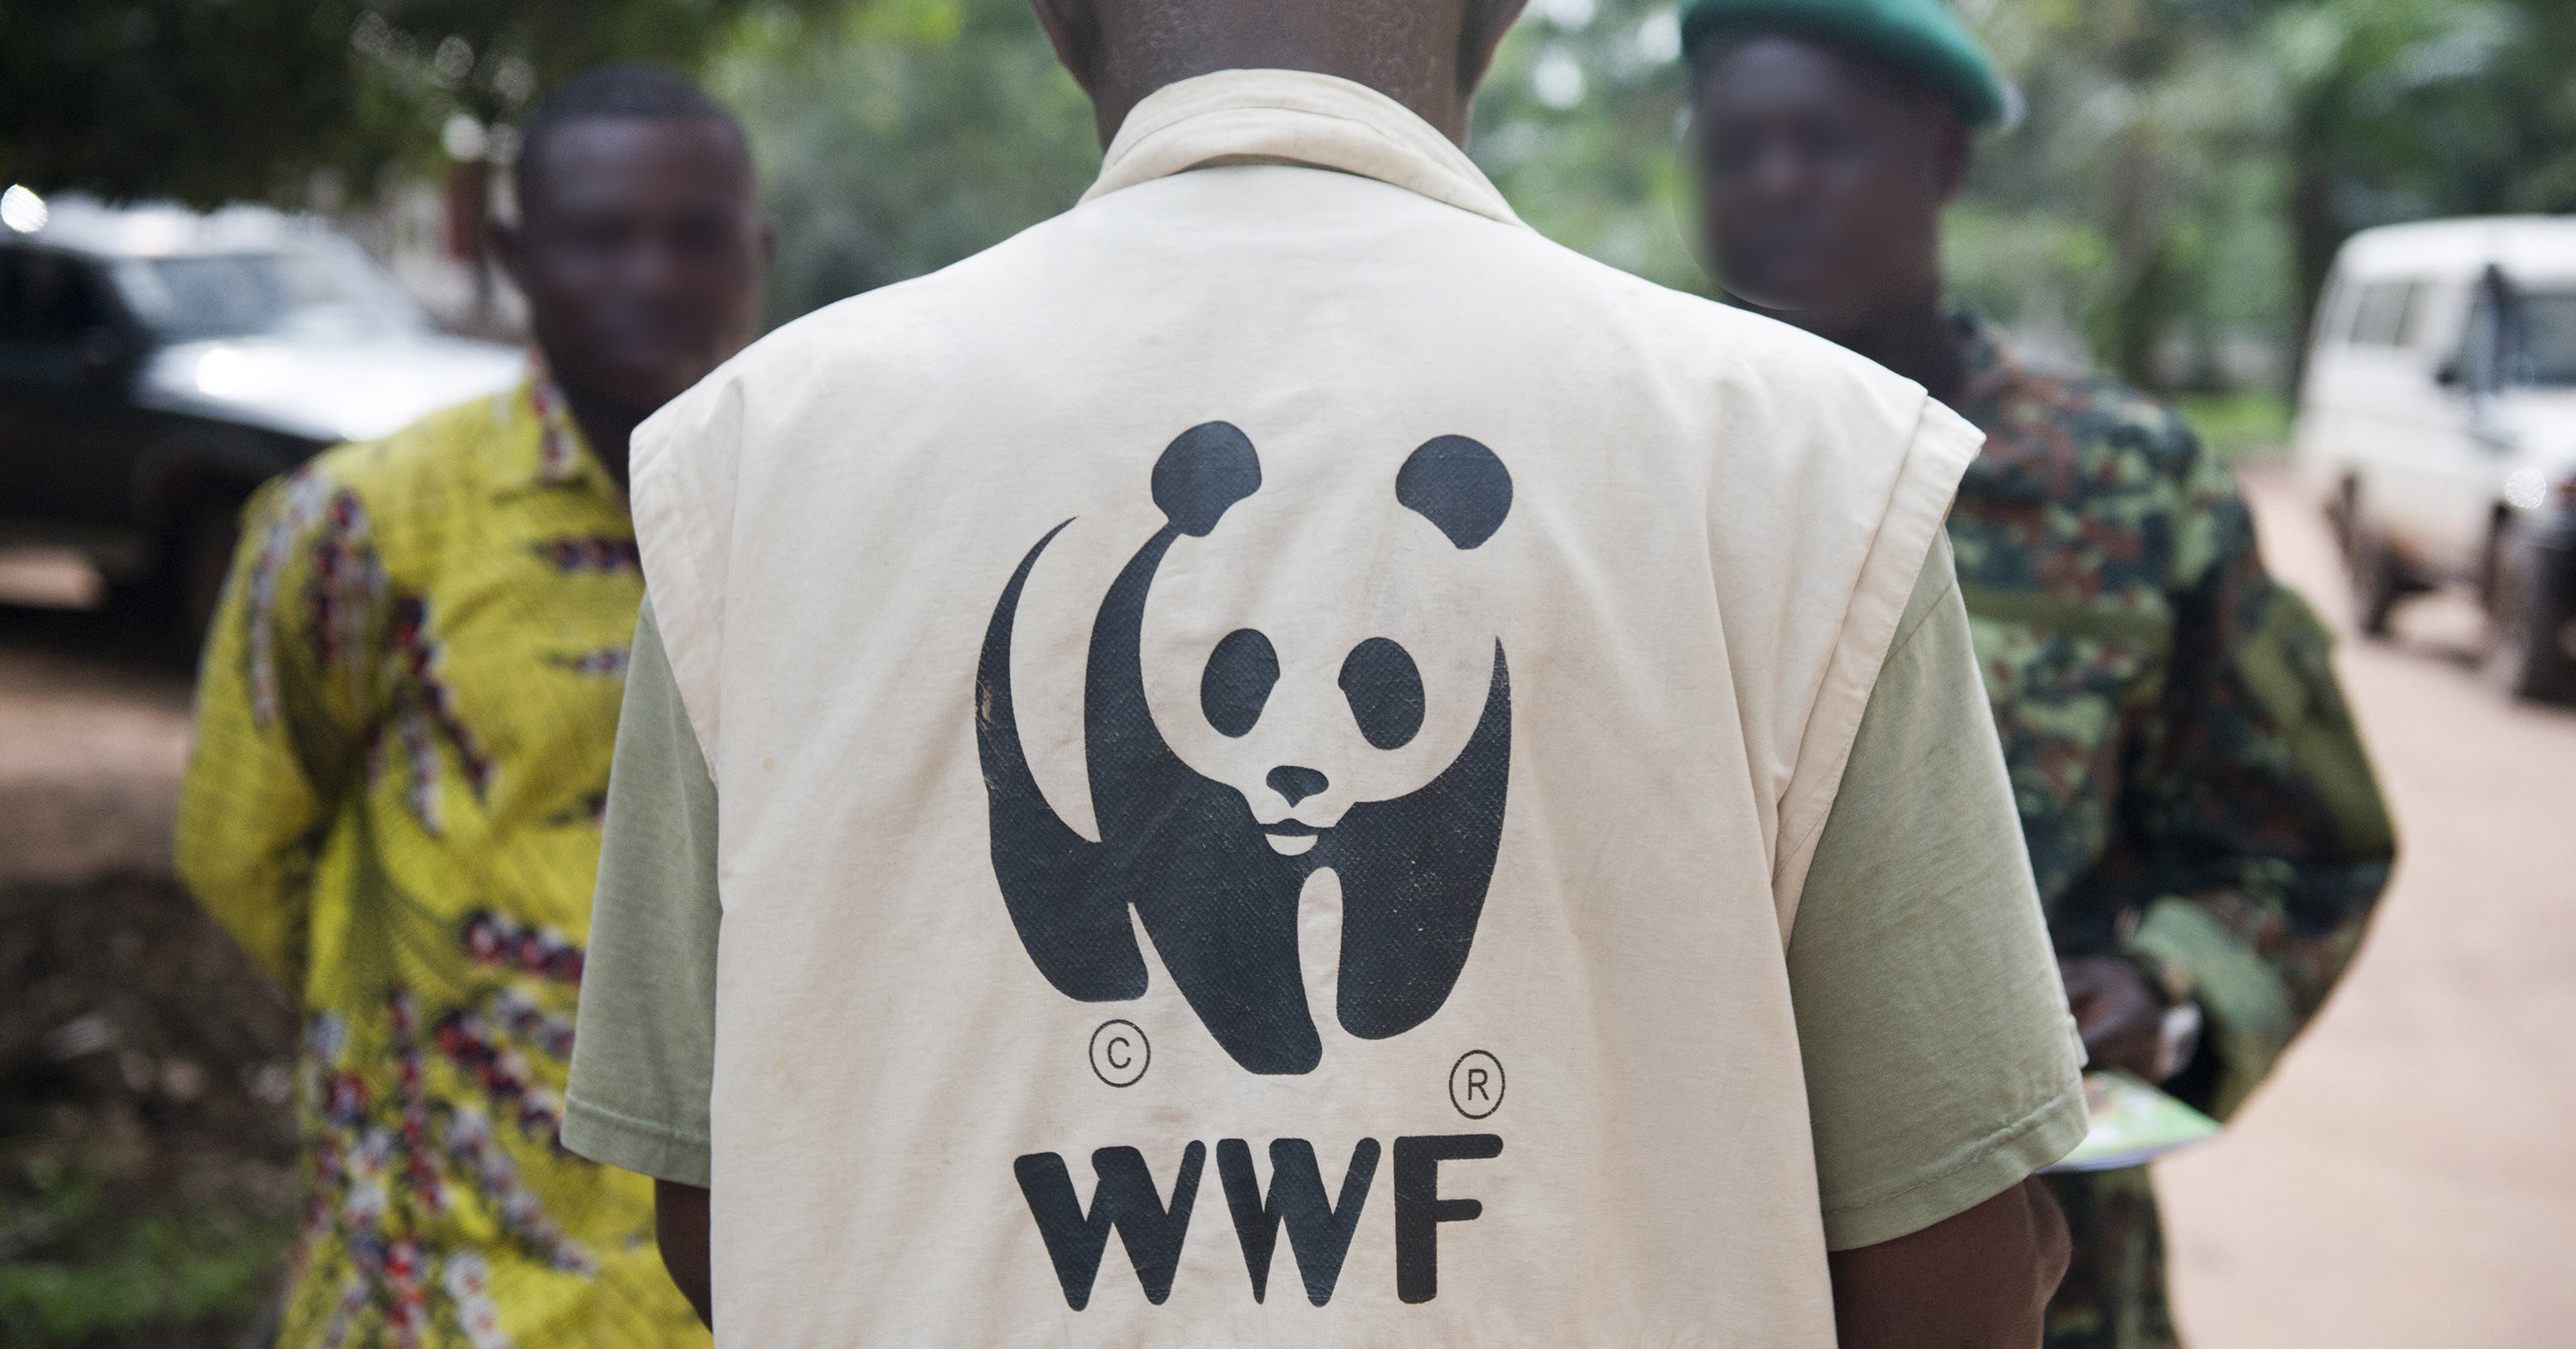 WWF Executives Were Warned Of Widespread Atrocities By Anti-Poaching Rangers The Charity Funded - BuzzFeed News